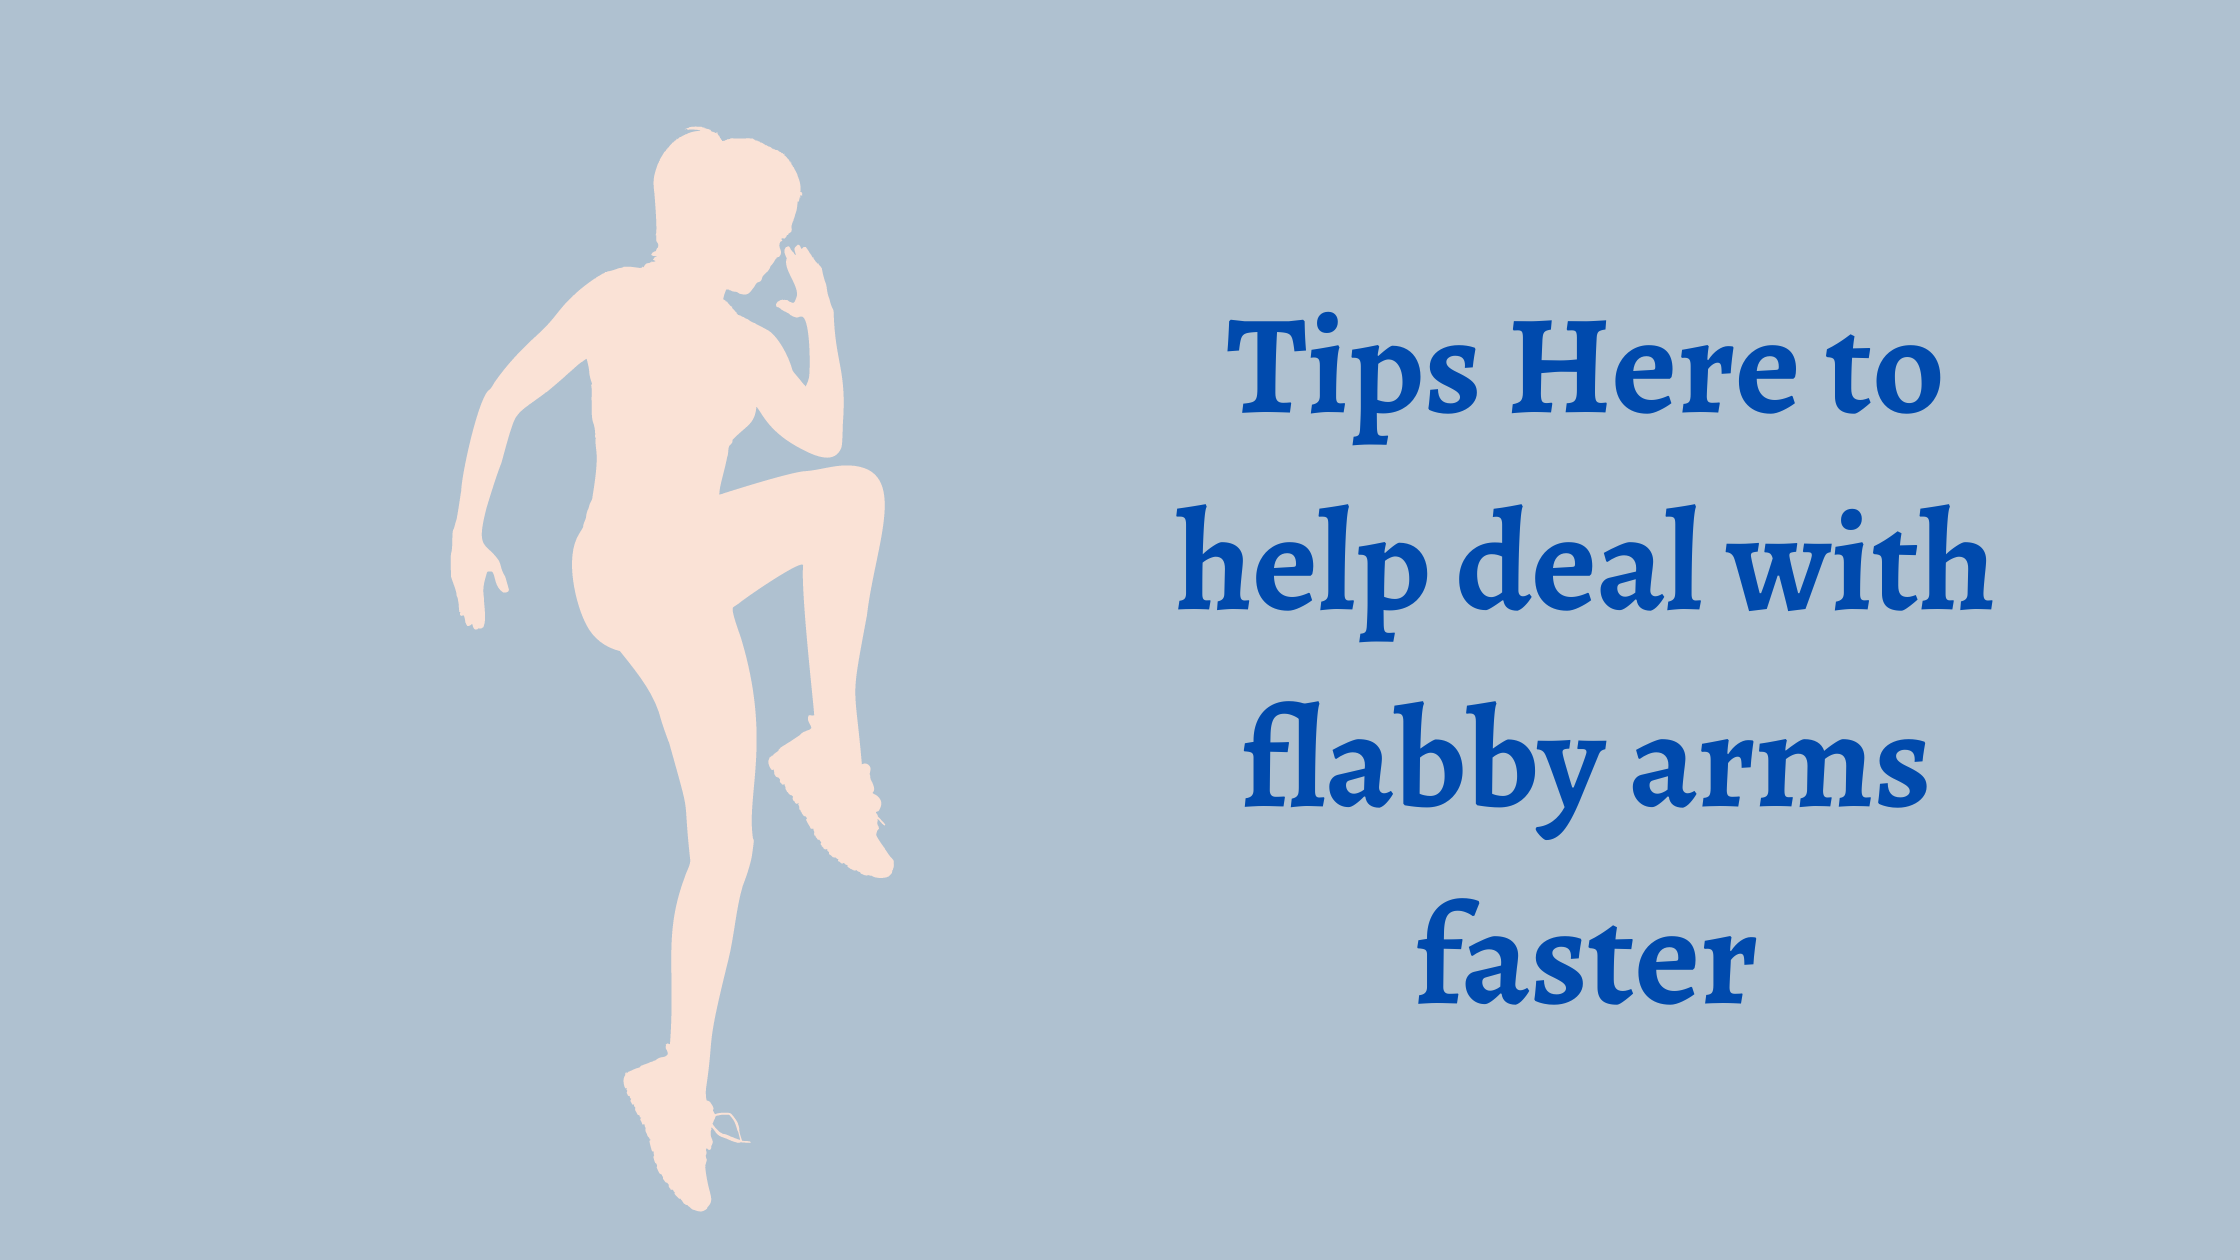 Tips deal with flabby arms faster